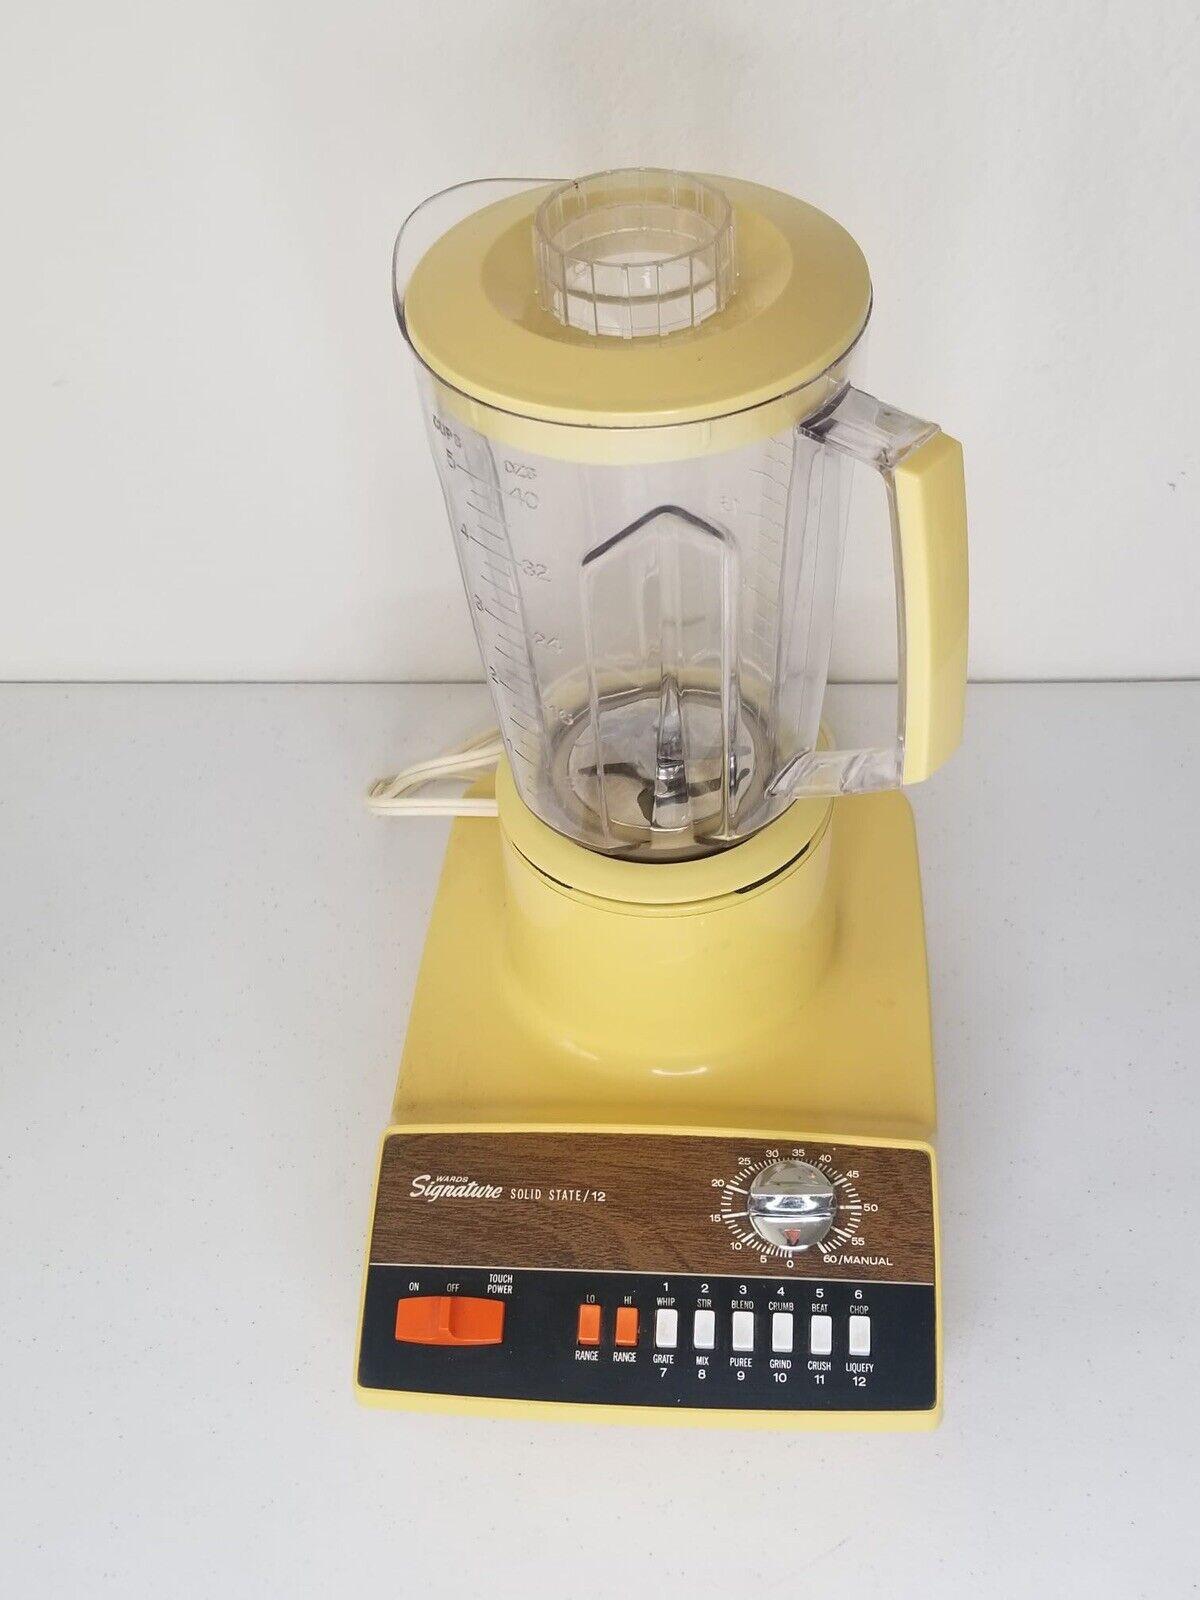 1970s Montgomery Ward Signature Solid State 12 Blender VNS 45804 - Vintage Yellow - TreasuTiques